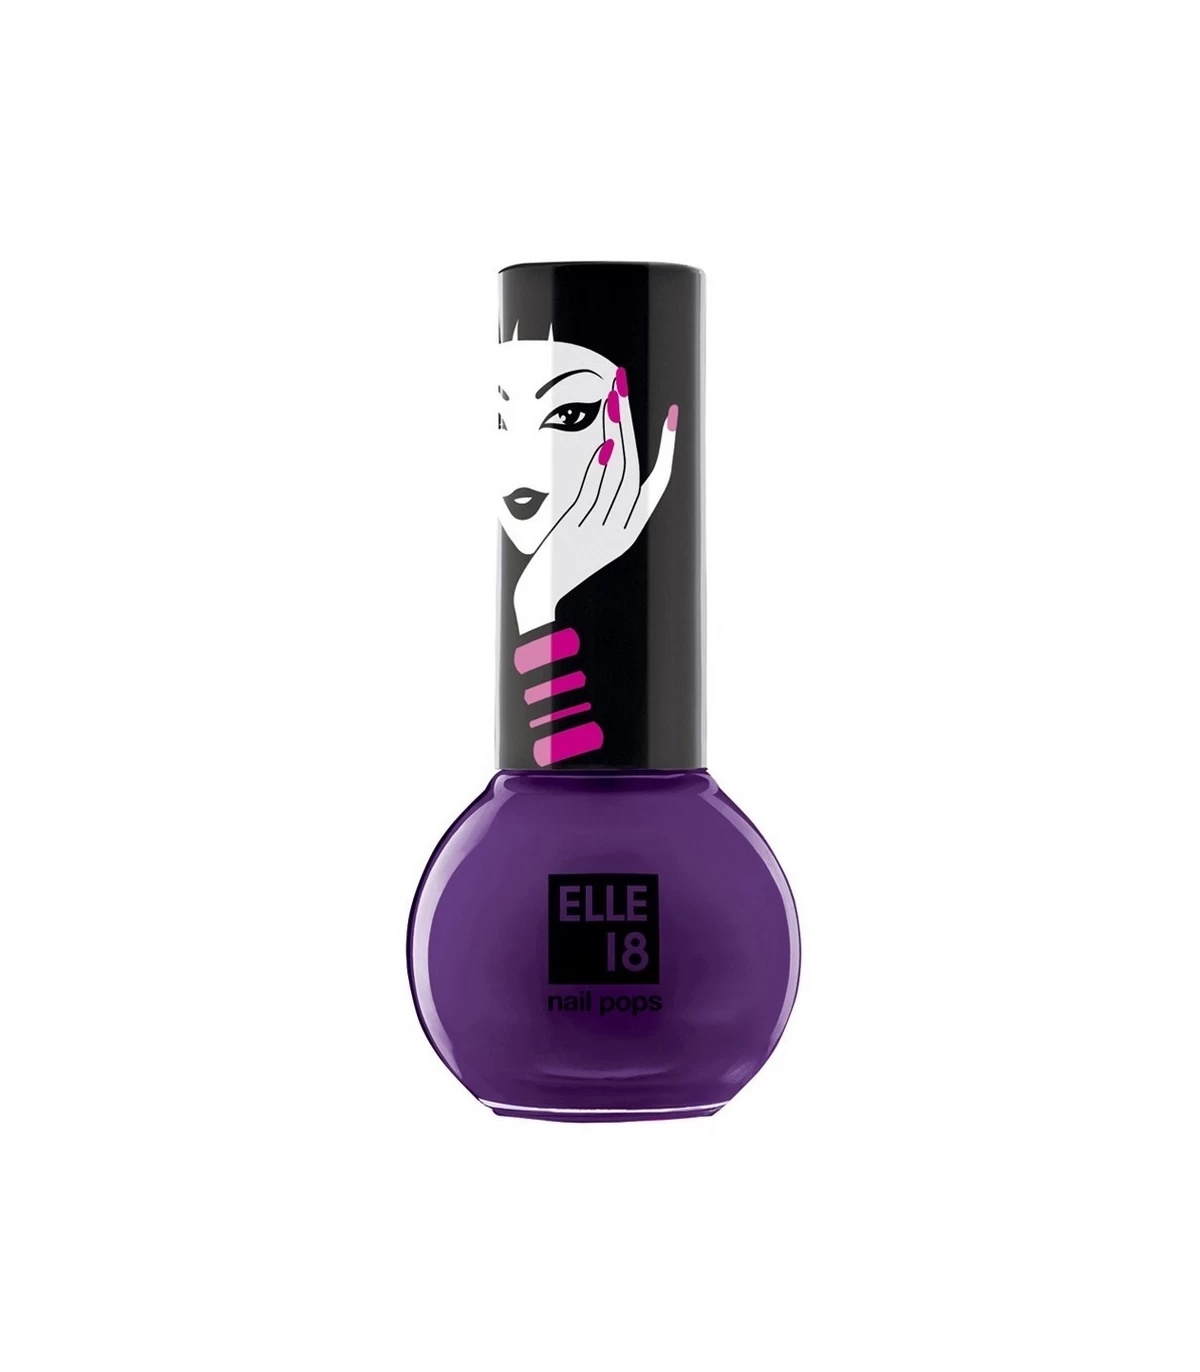 best makeup beauty mommy blog of india: Elle 18 Nail Pops Shade '23' Review  & NOTD